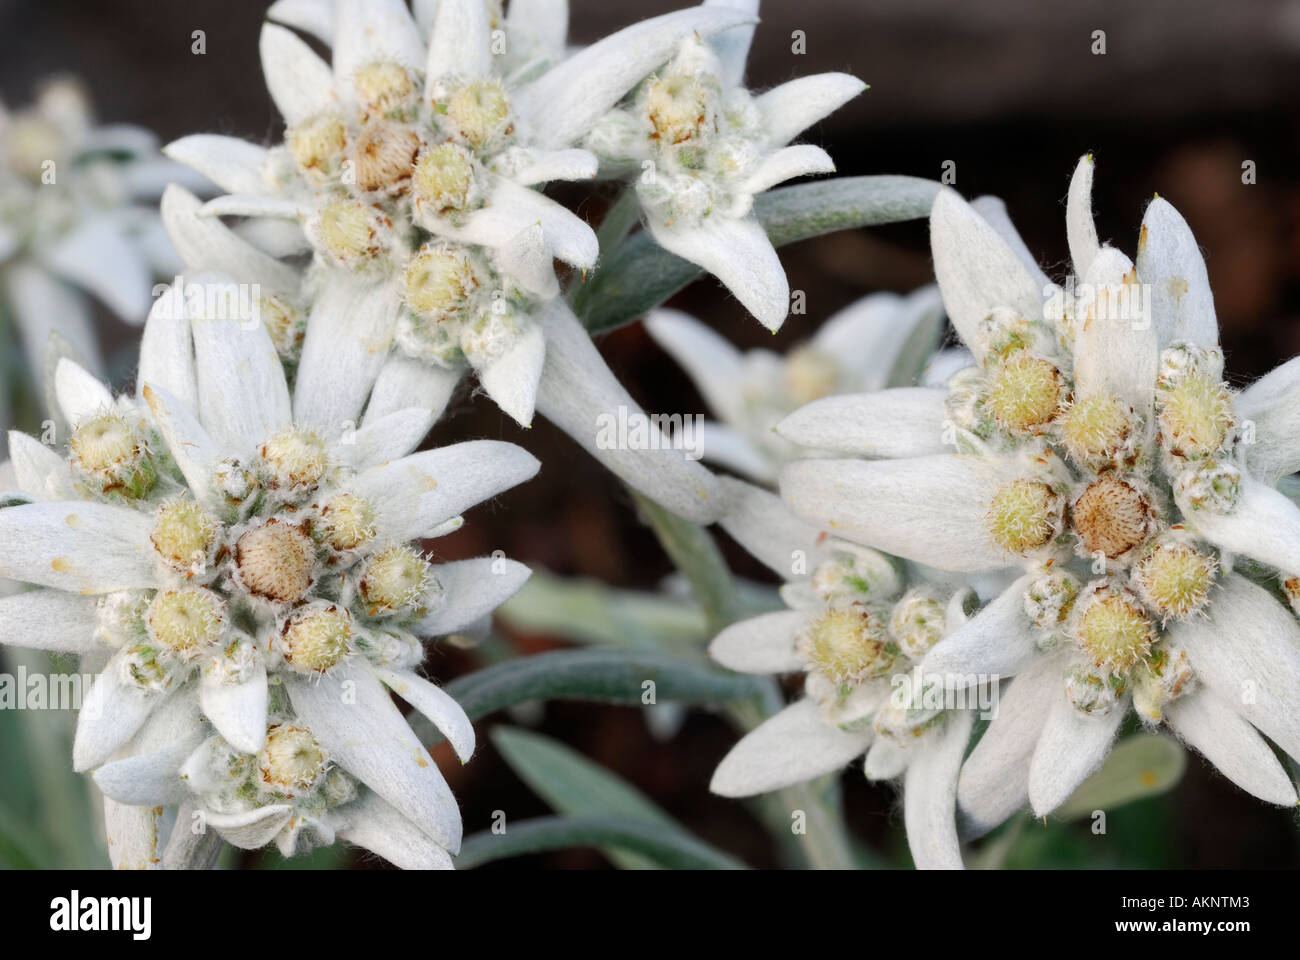 Cluster of alpine Edelweiss flowers with woolly leaves Stock Photo